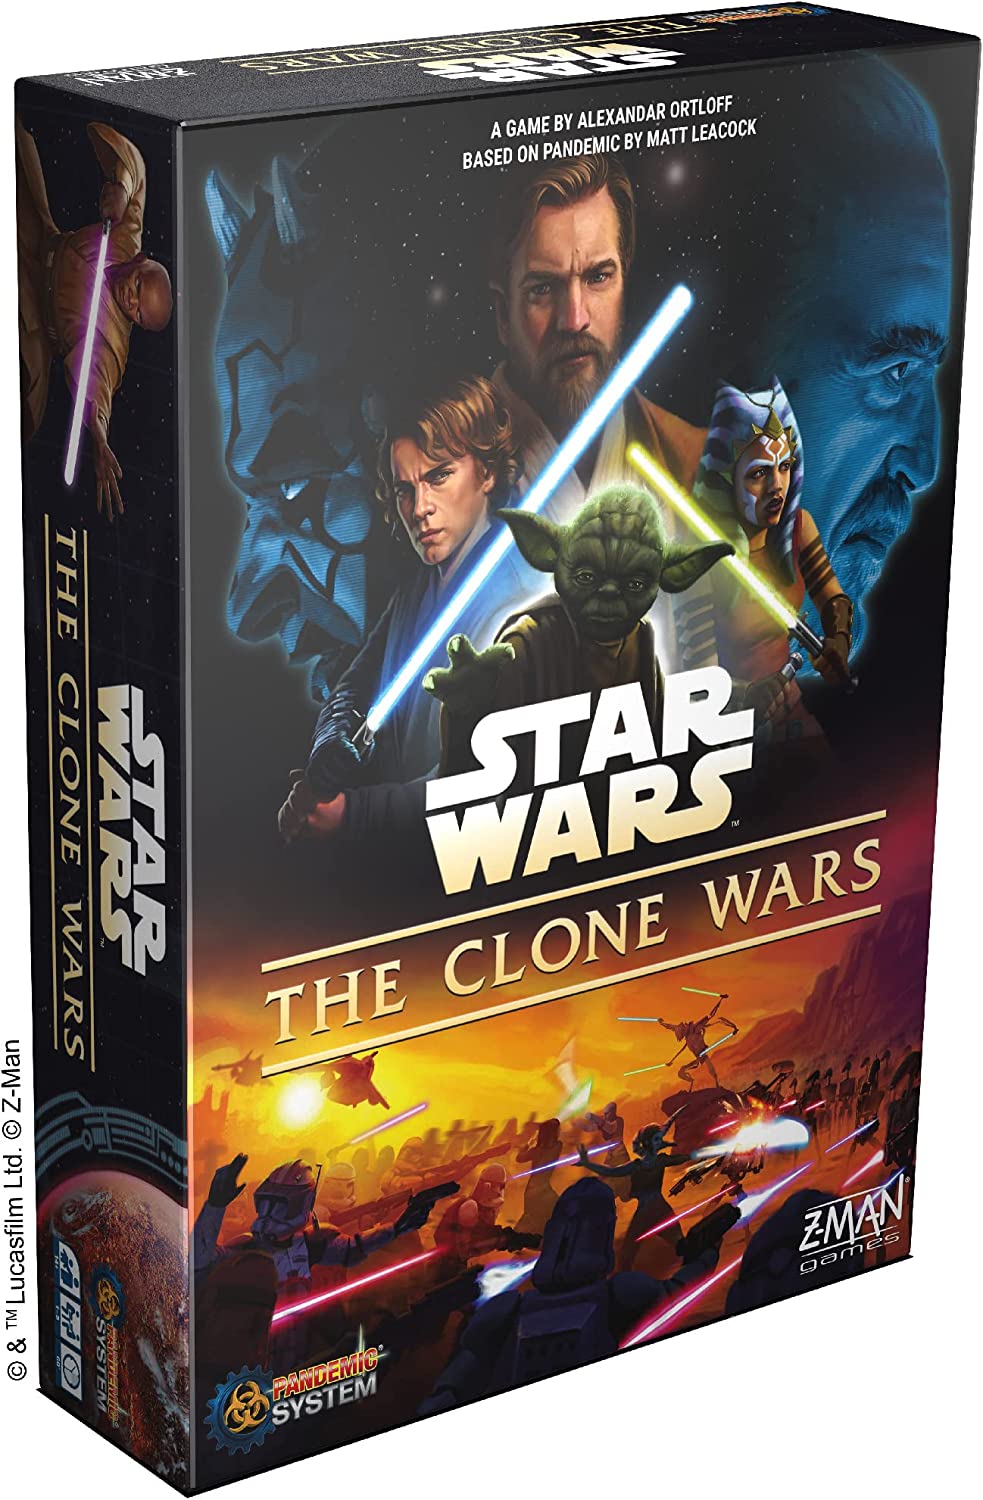 THE CLONE WARS - Complete Season One Episode Poster Collection : r/clonewars